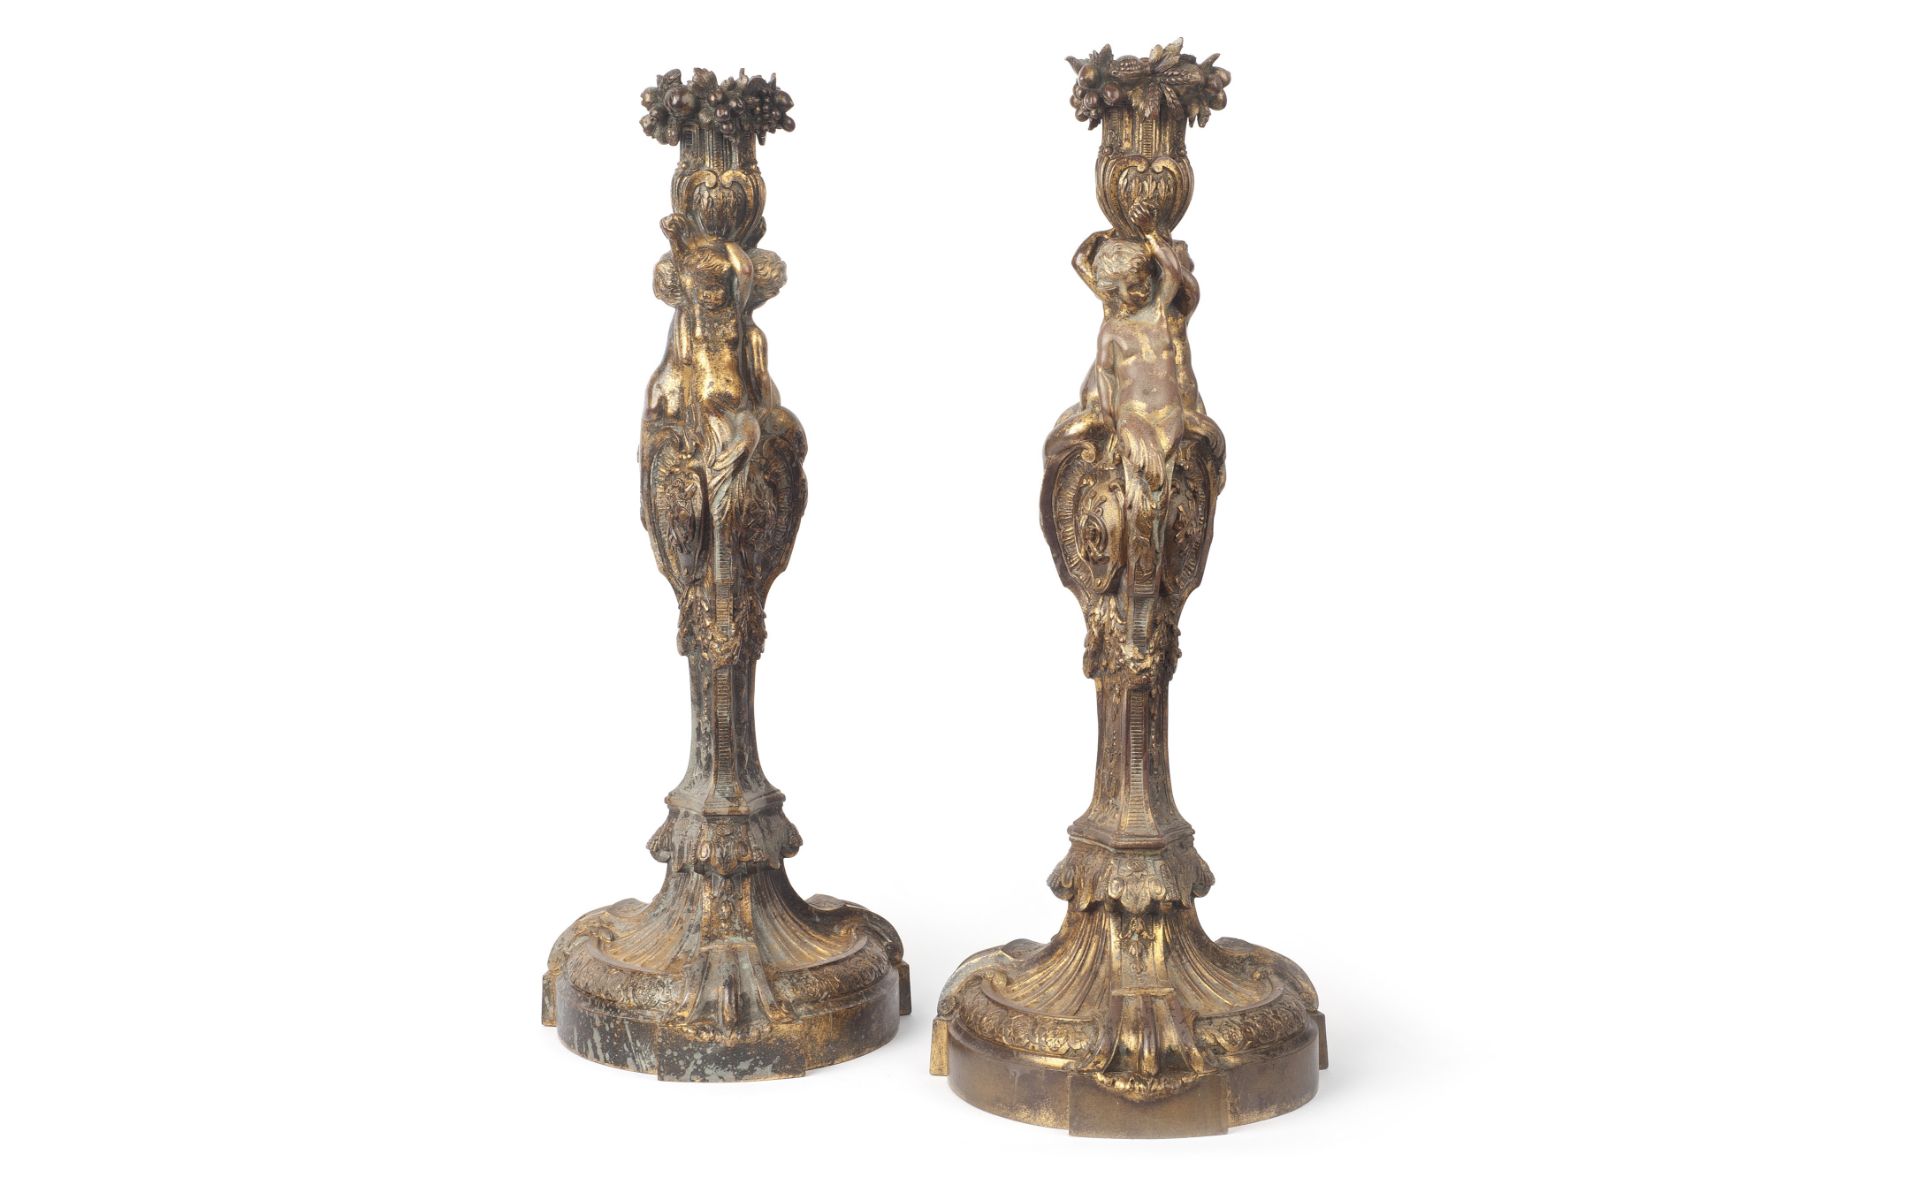 AFTER JUSTE-AURELE MEISSONNIER (1695-1750): A PAIR OF 19TH CENTURY GILT BRONZE LAMP BASES - Image 2 of 3